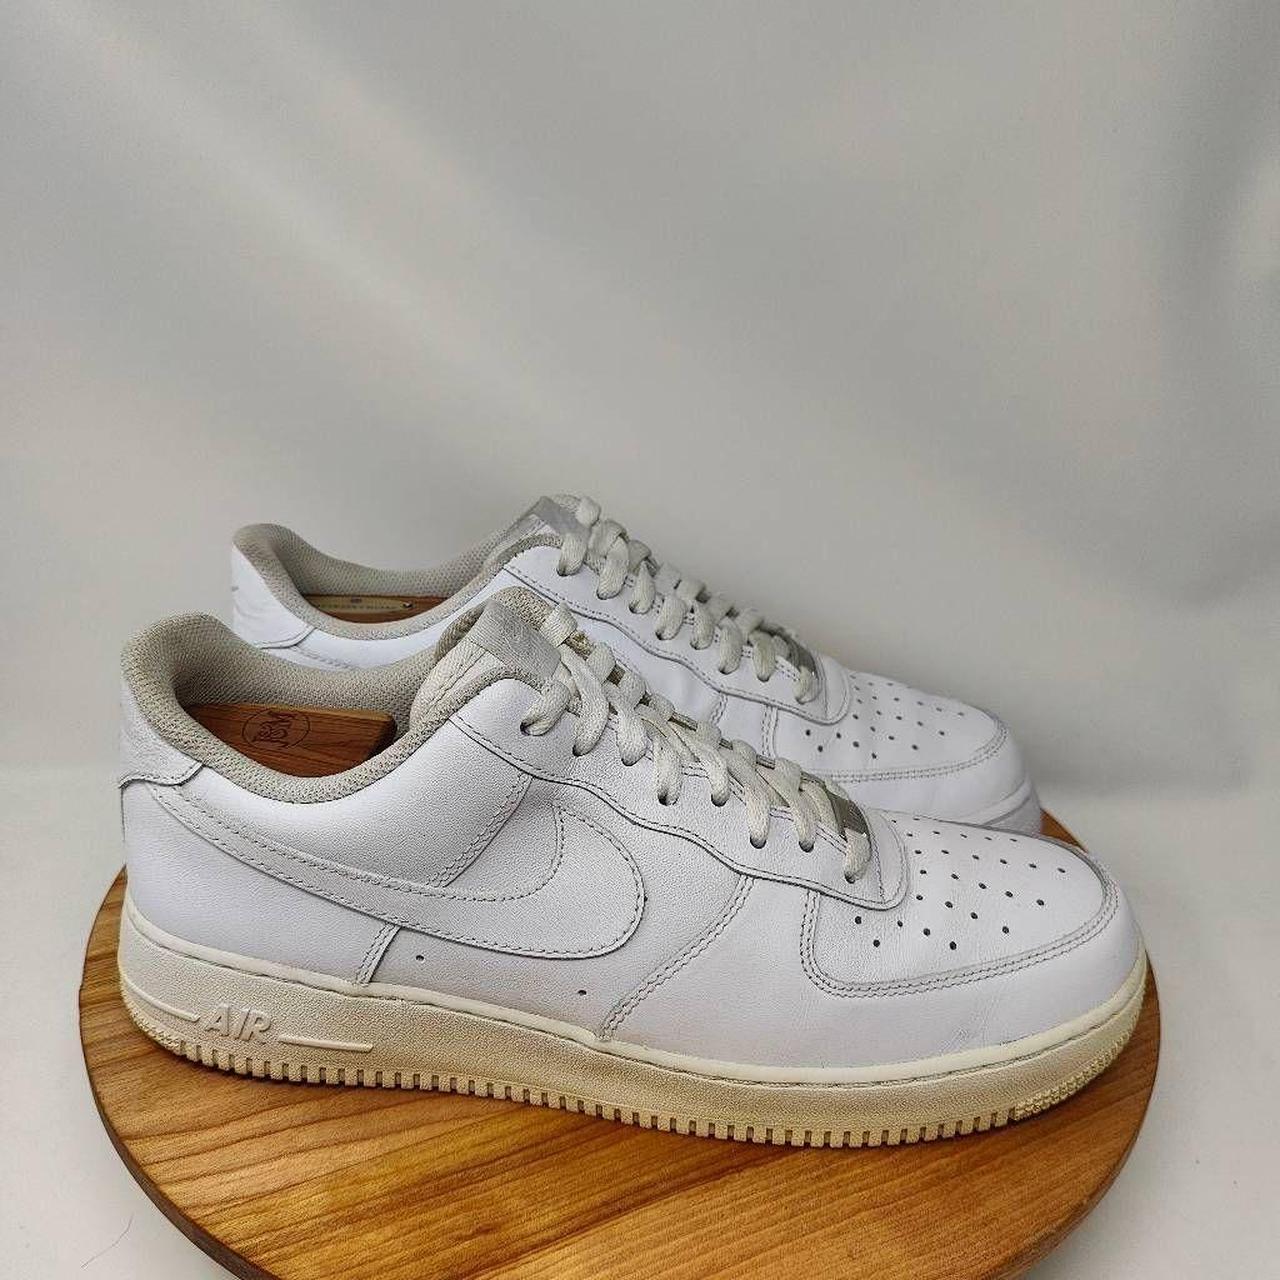 Nike Men's Air Force 1 '07 Shoes in White, Size: 10 | FV8105-161